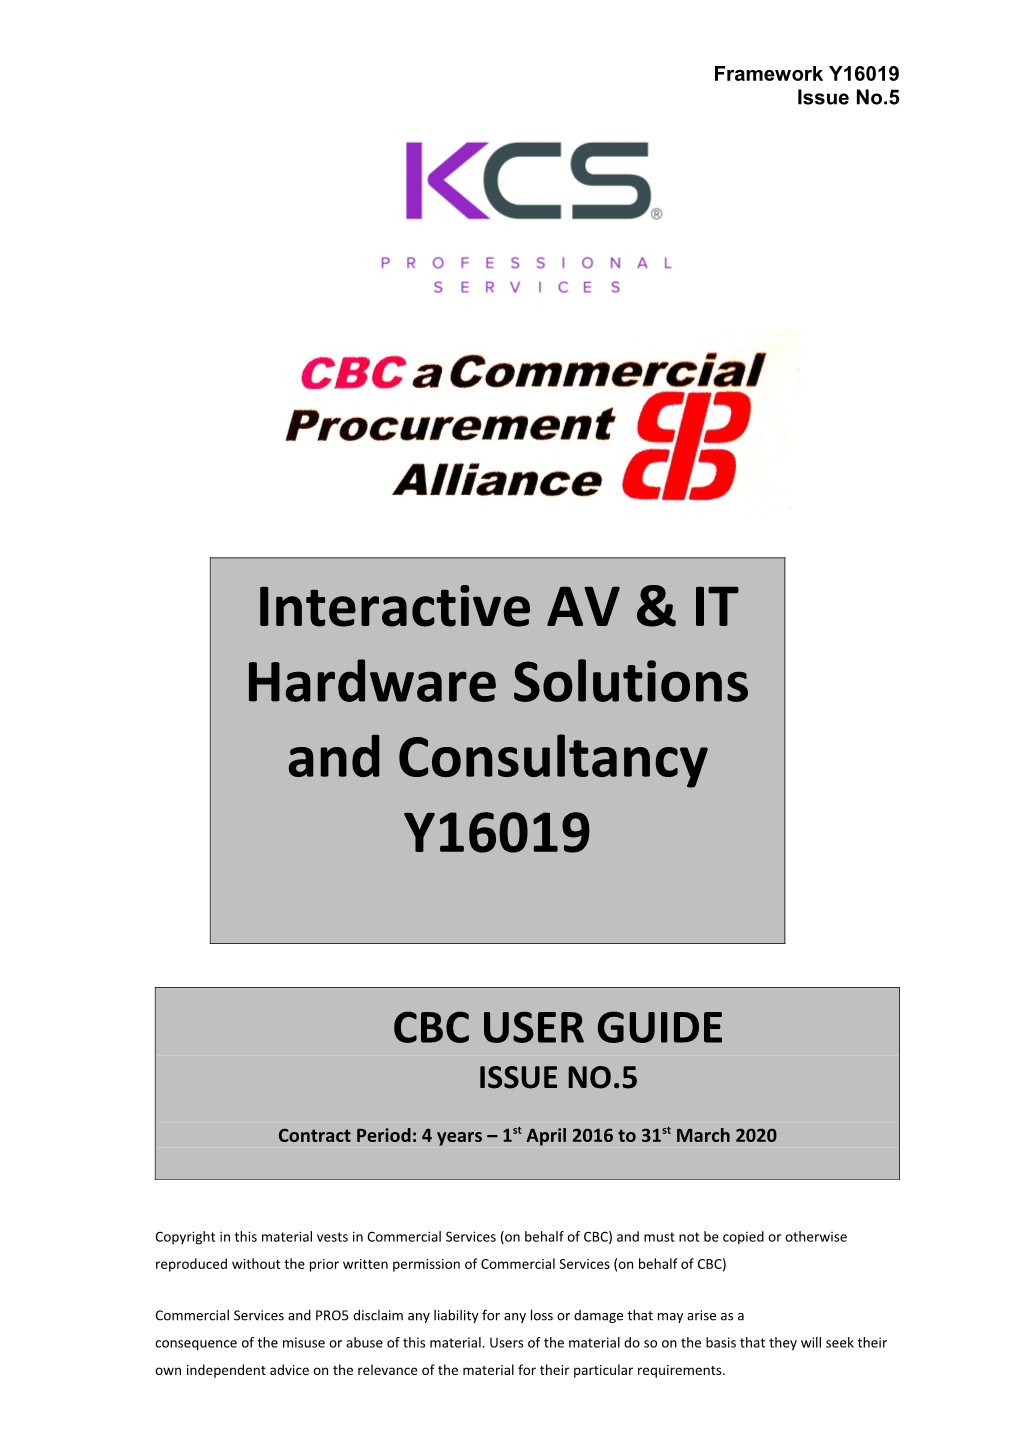 Interactive AV & IT Hardware Solutions and Consultancy Y16019